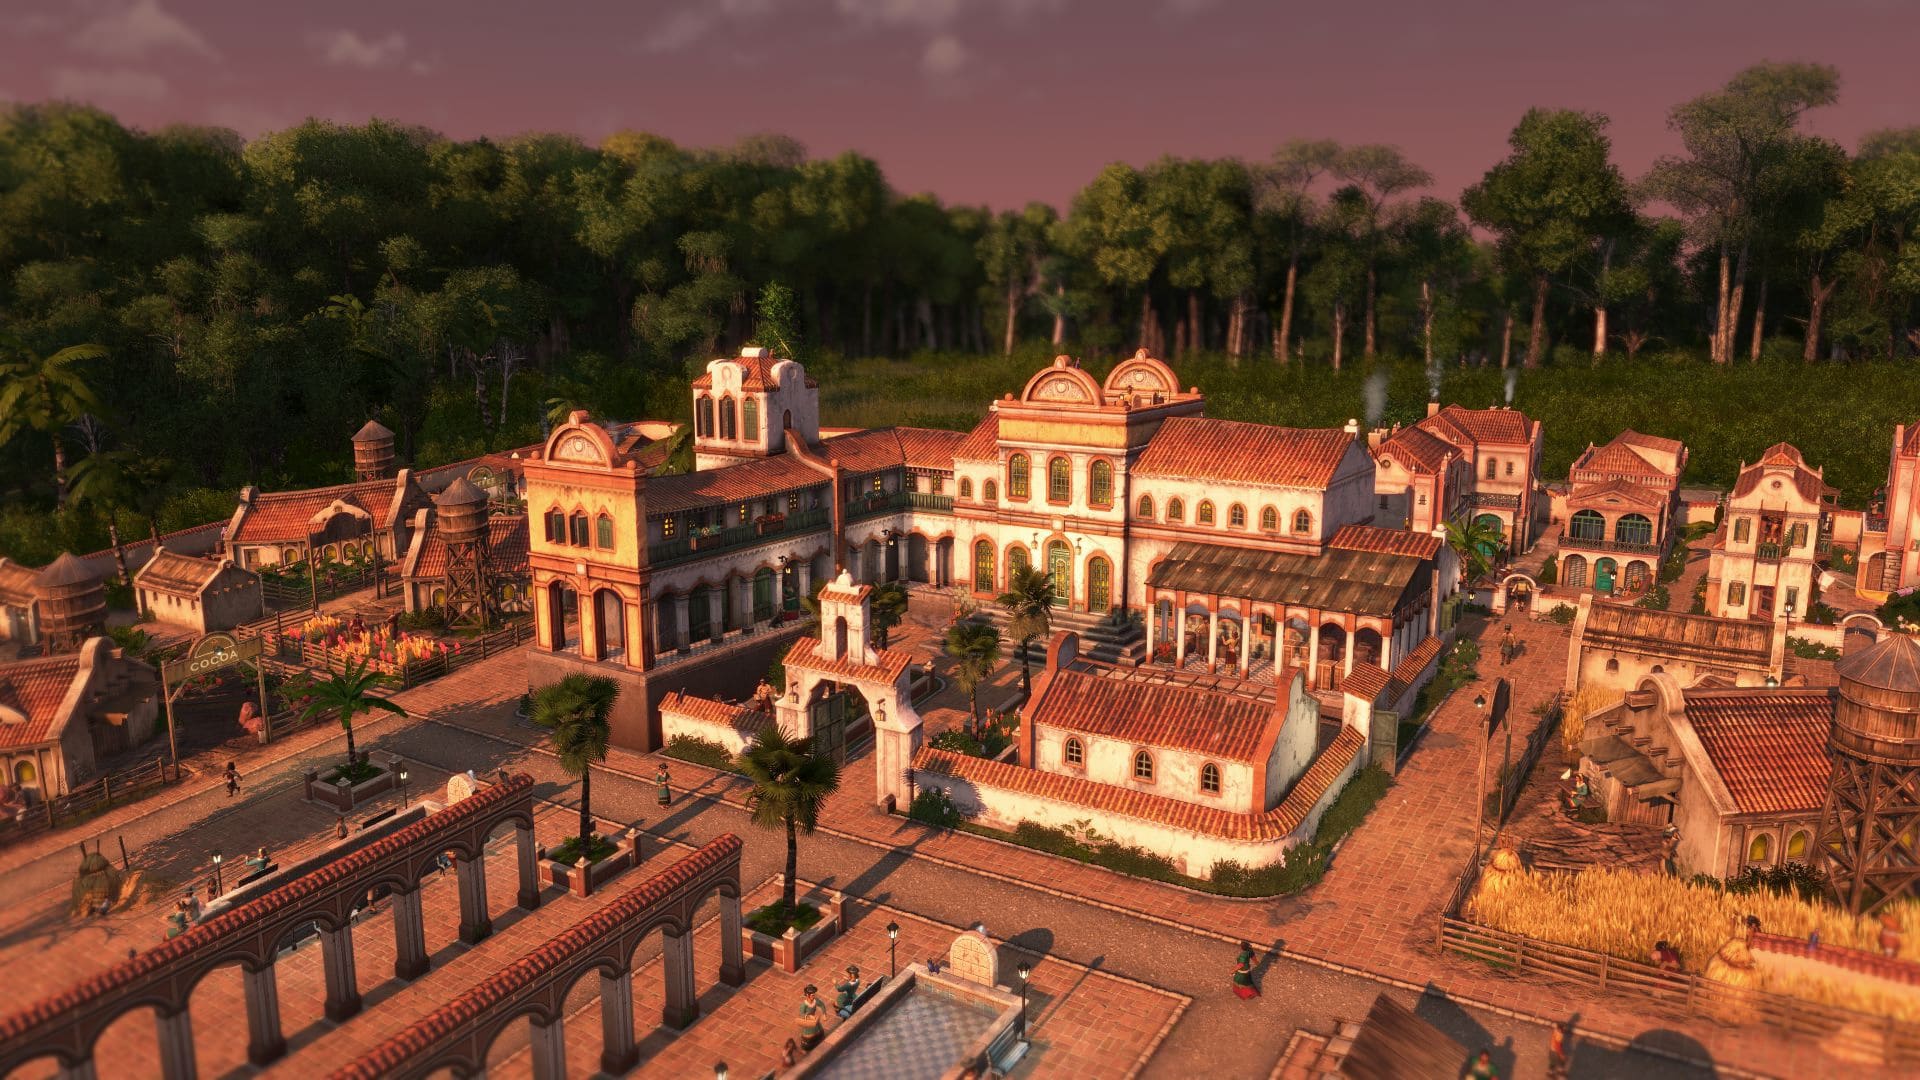 The Hacienda will be our seat of power in the New World and will bring advantages in almost all areas.